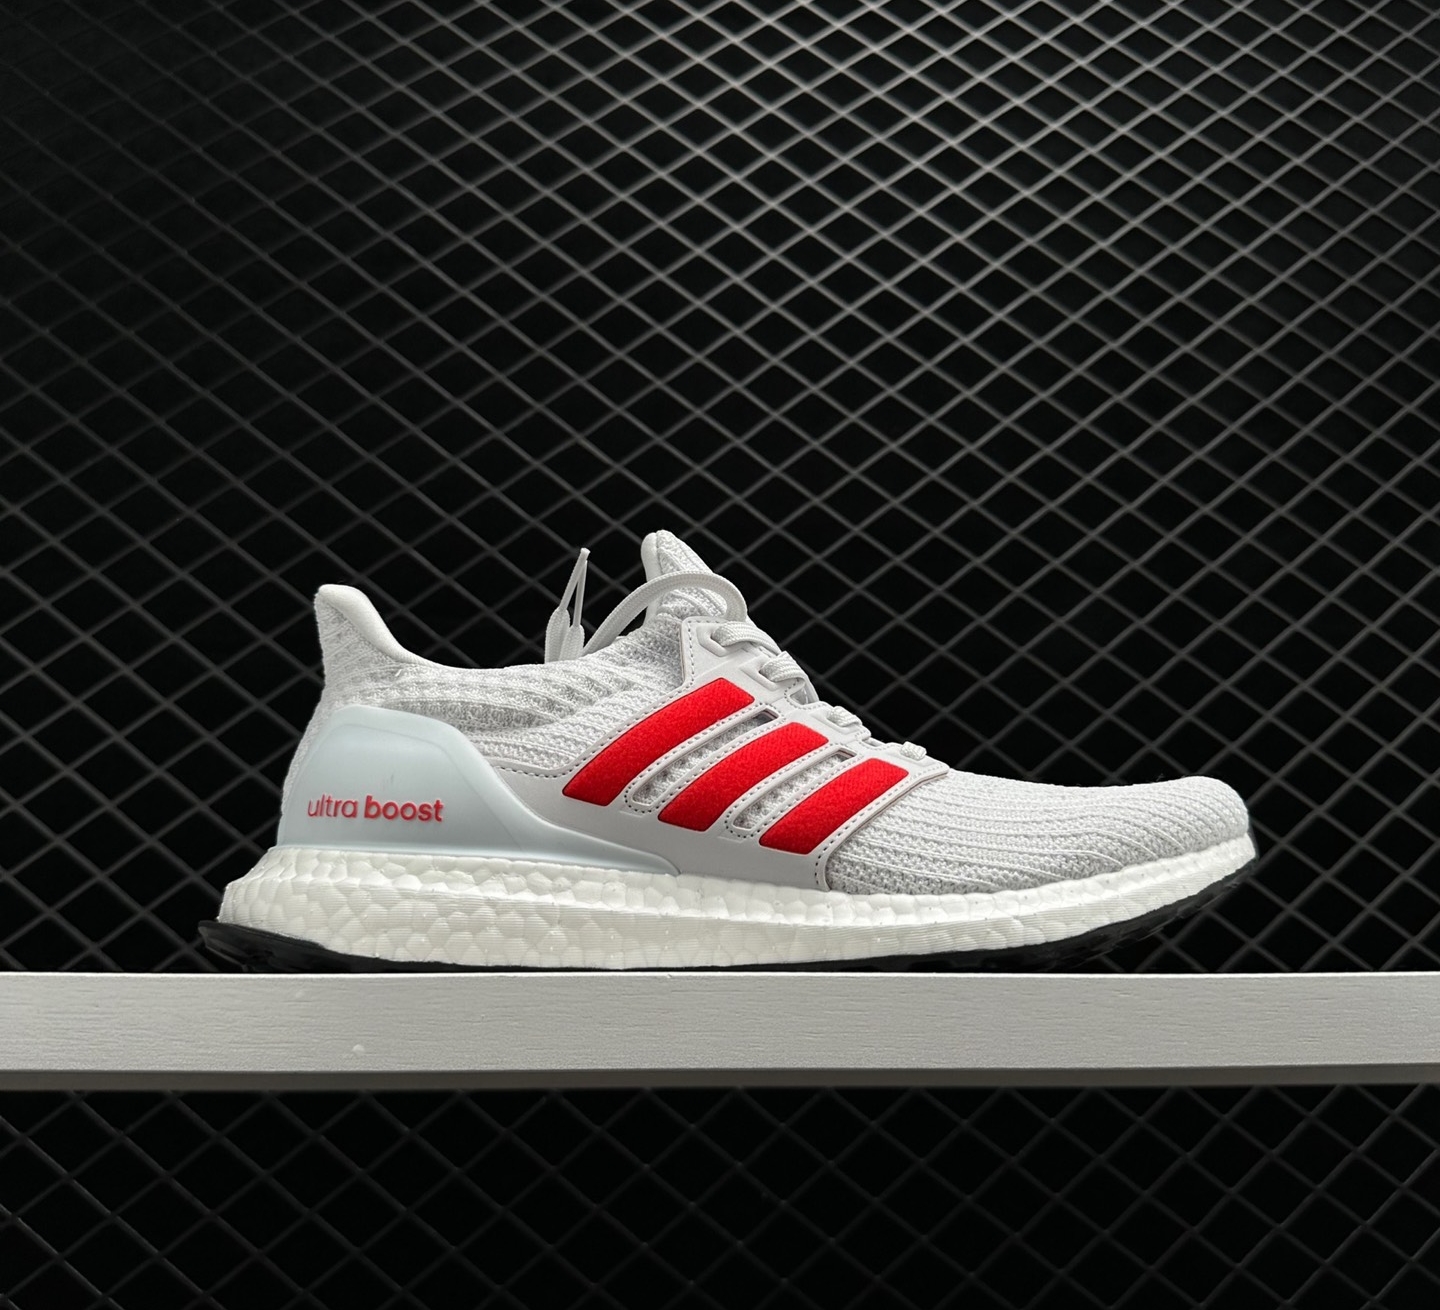 Adidas UltraBoost 4.0 DNA White Scarlet FY9336 - Quality Boost Performance